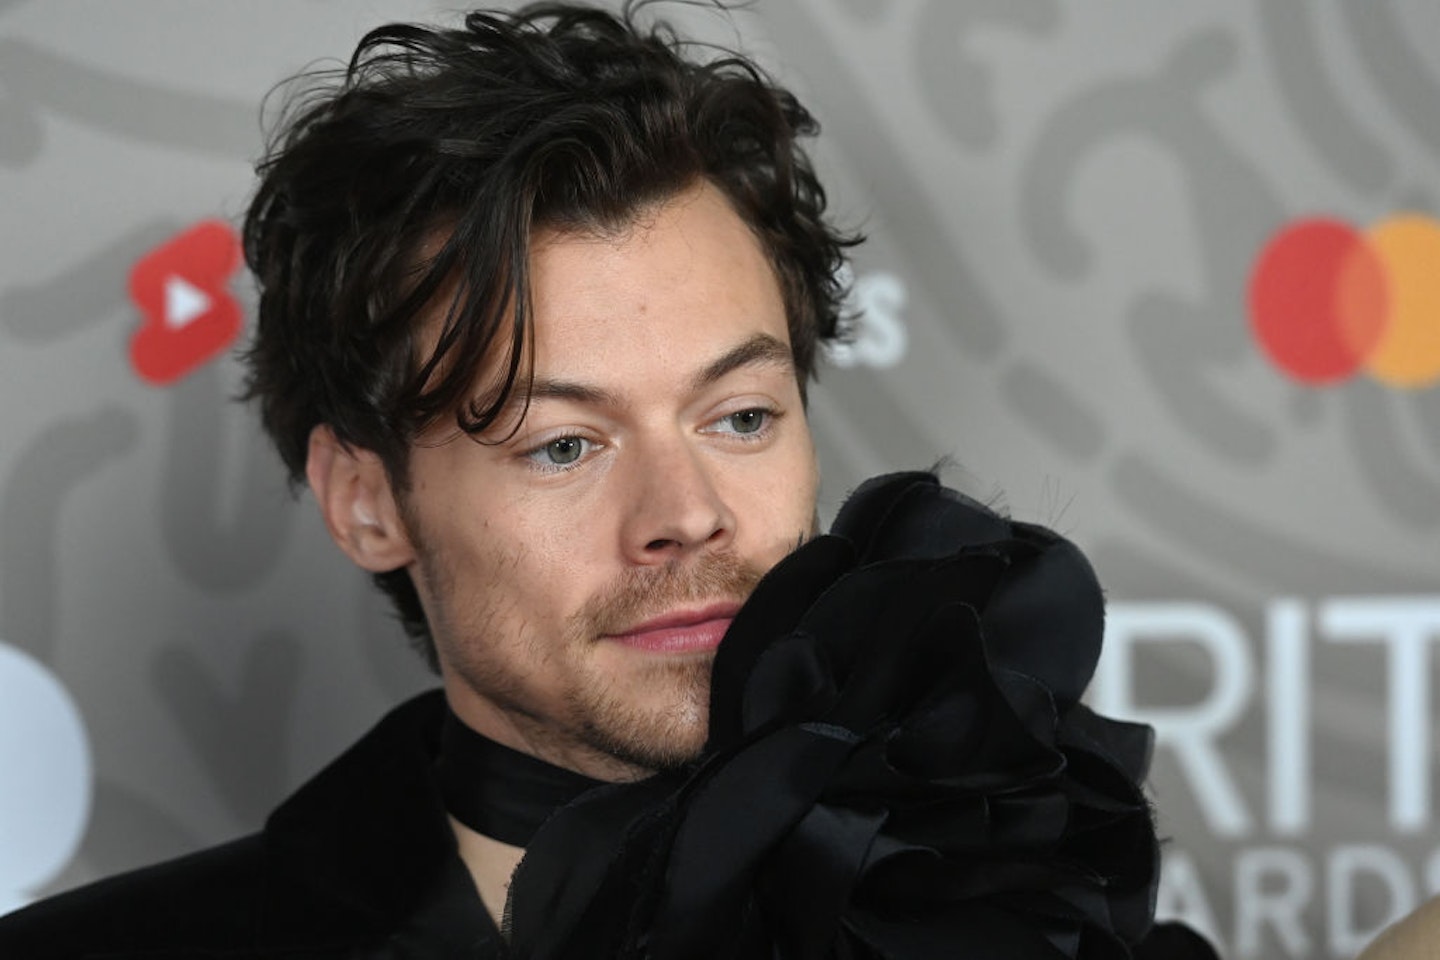 Harry Styles is rumoured to be single again